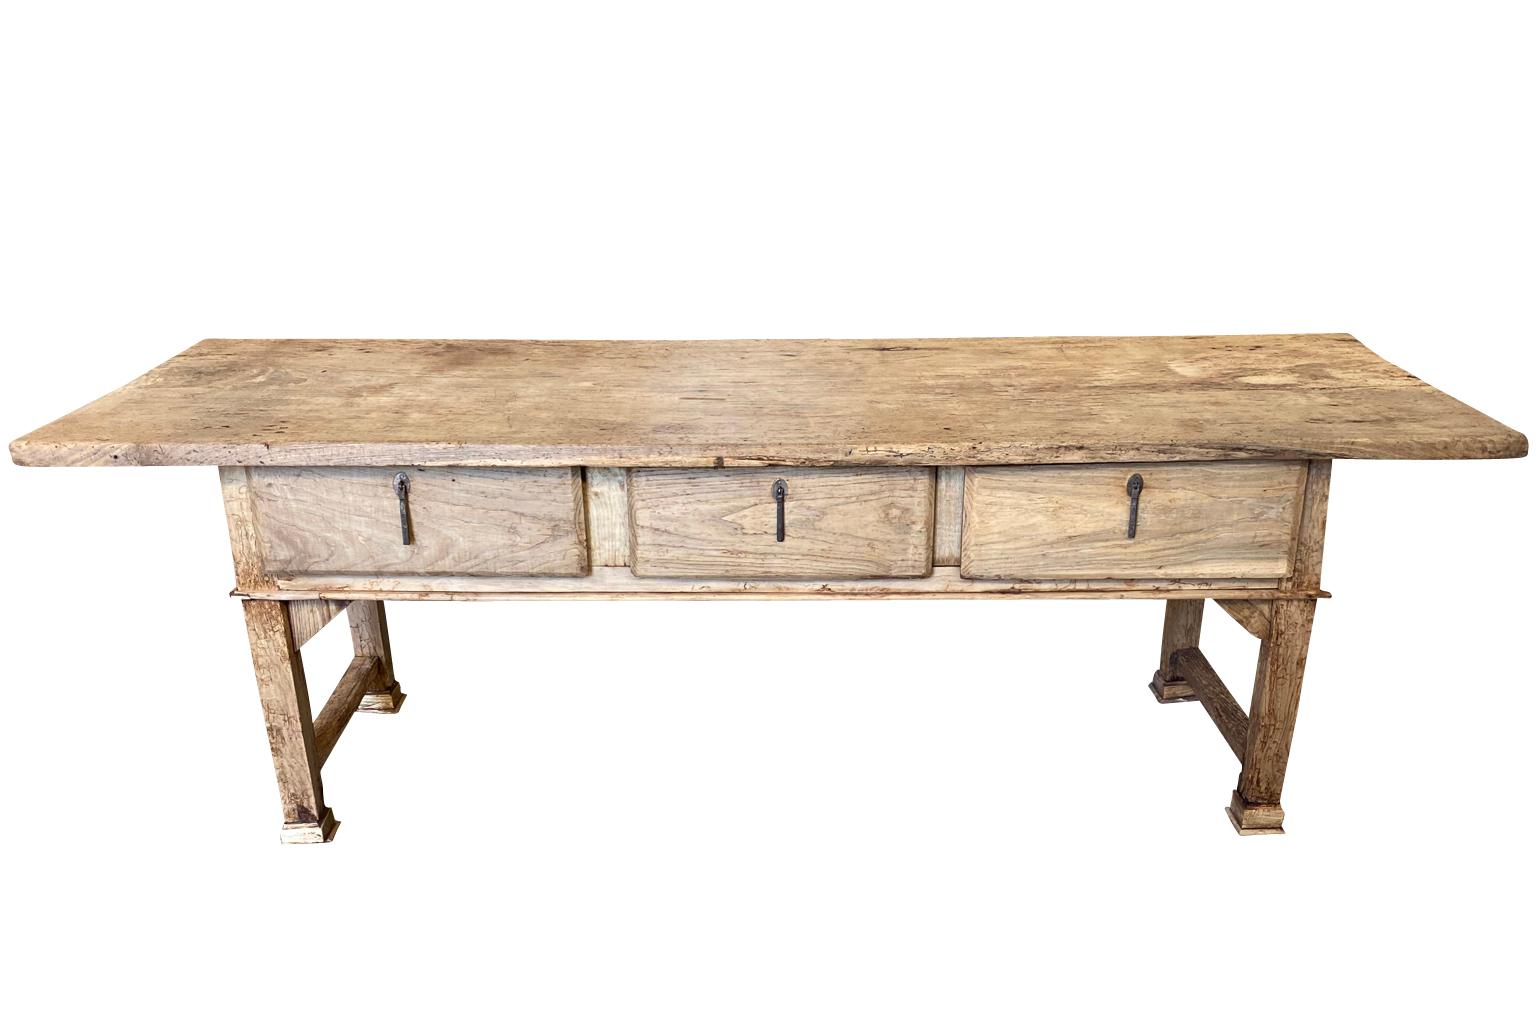 A very beautiful 18th century primitive long console from the Catalan region of Spain. Soundly constructed from washed oak with drawers and a stunning solid board top.

 
 